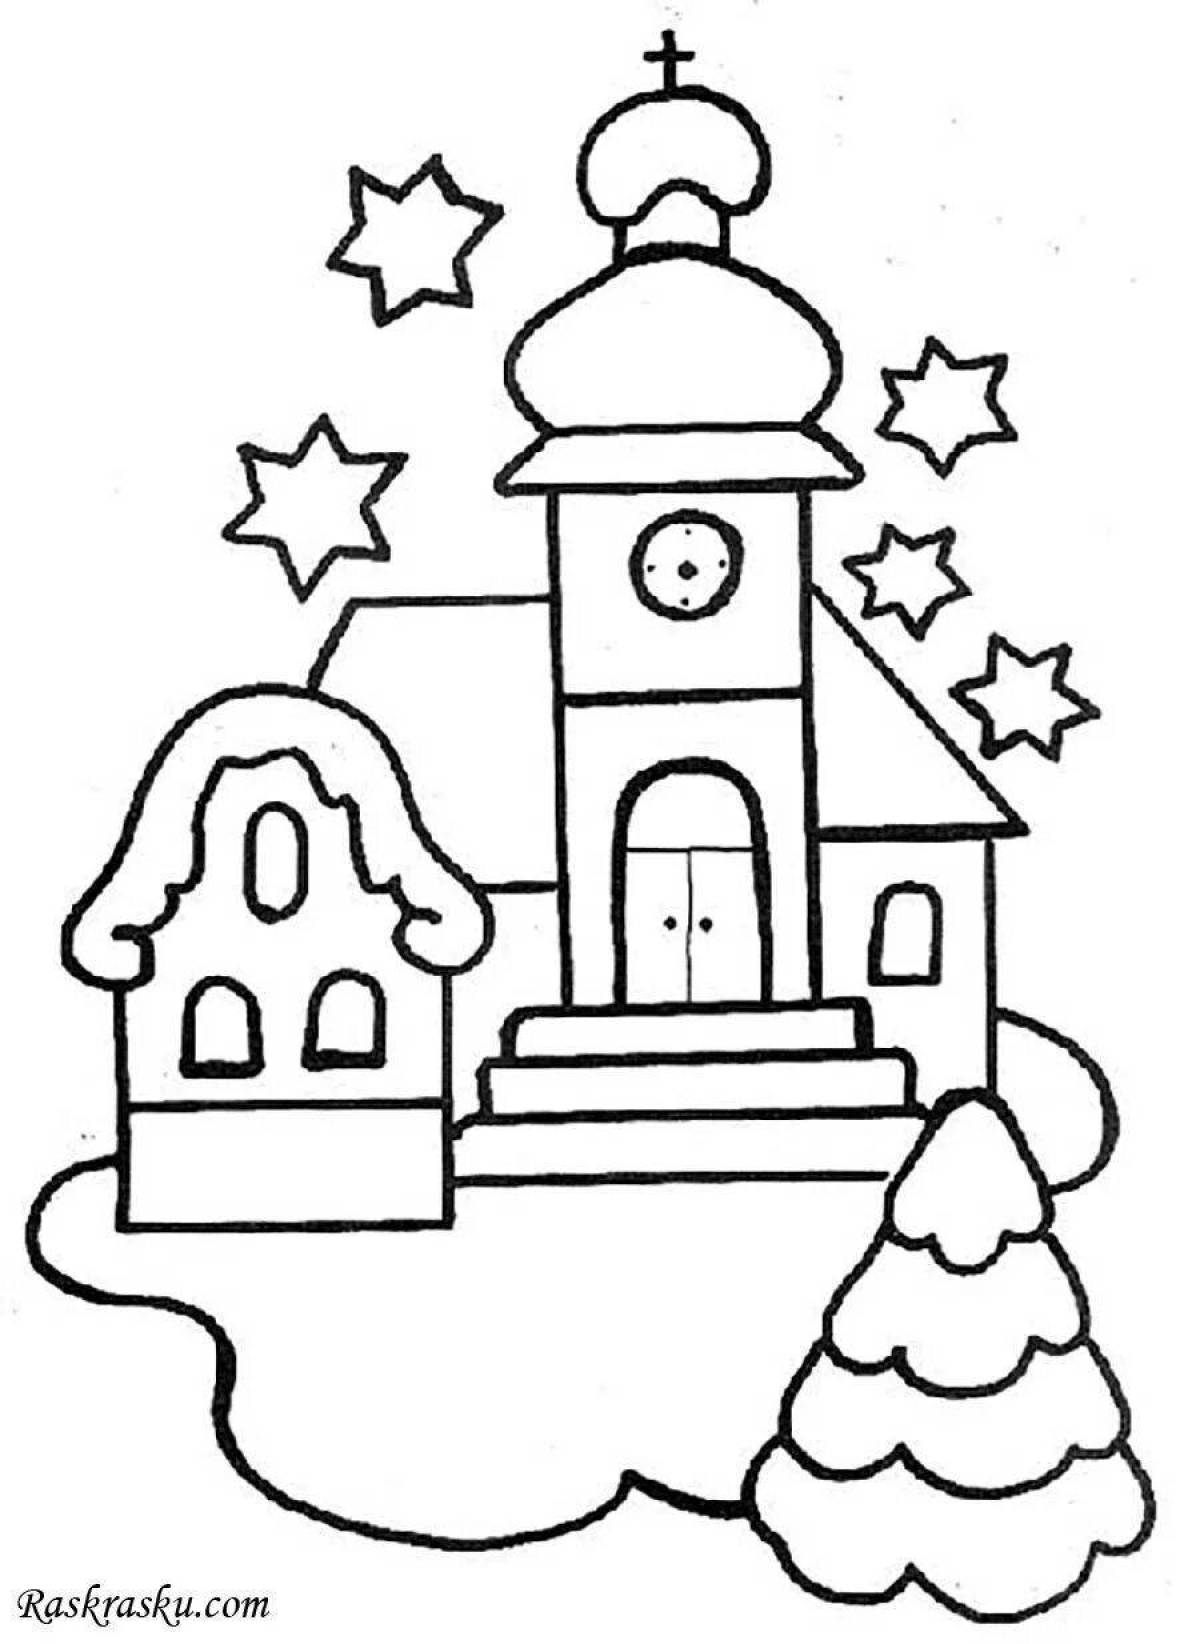 Coloring book magic temple for kids